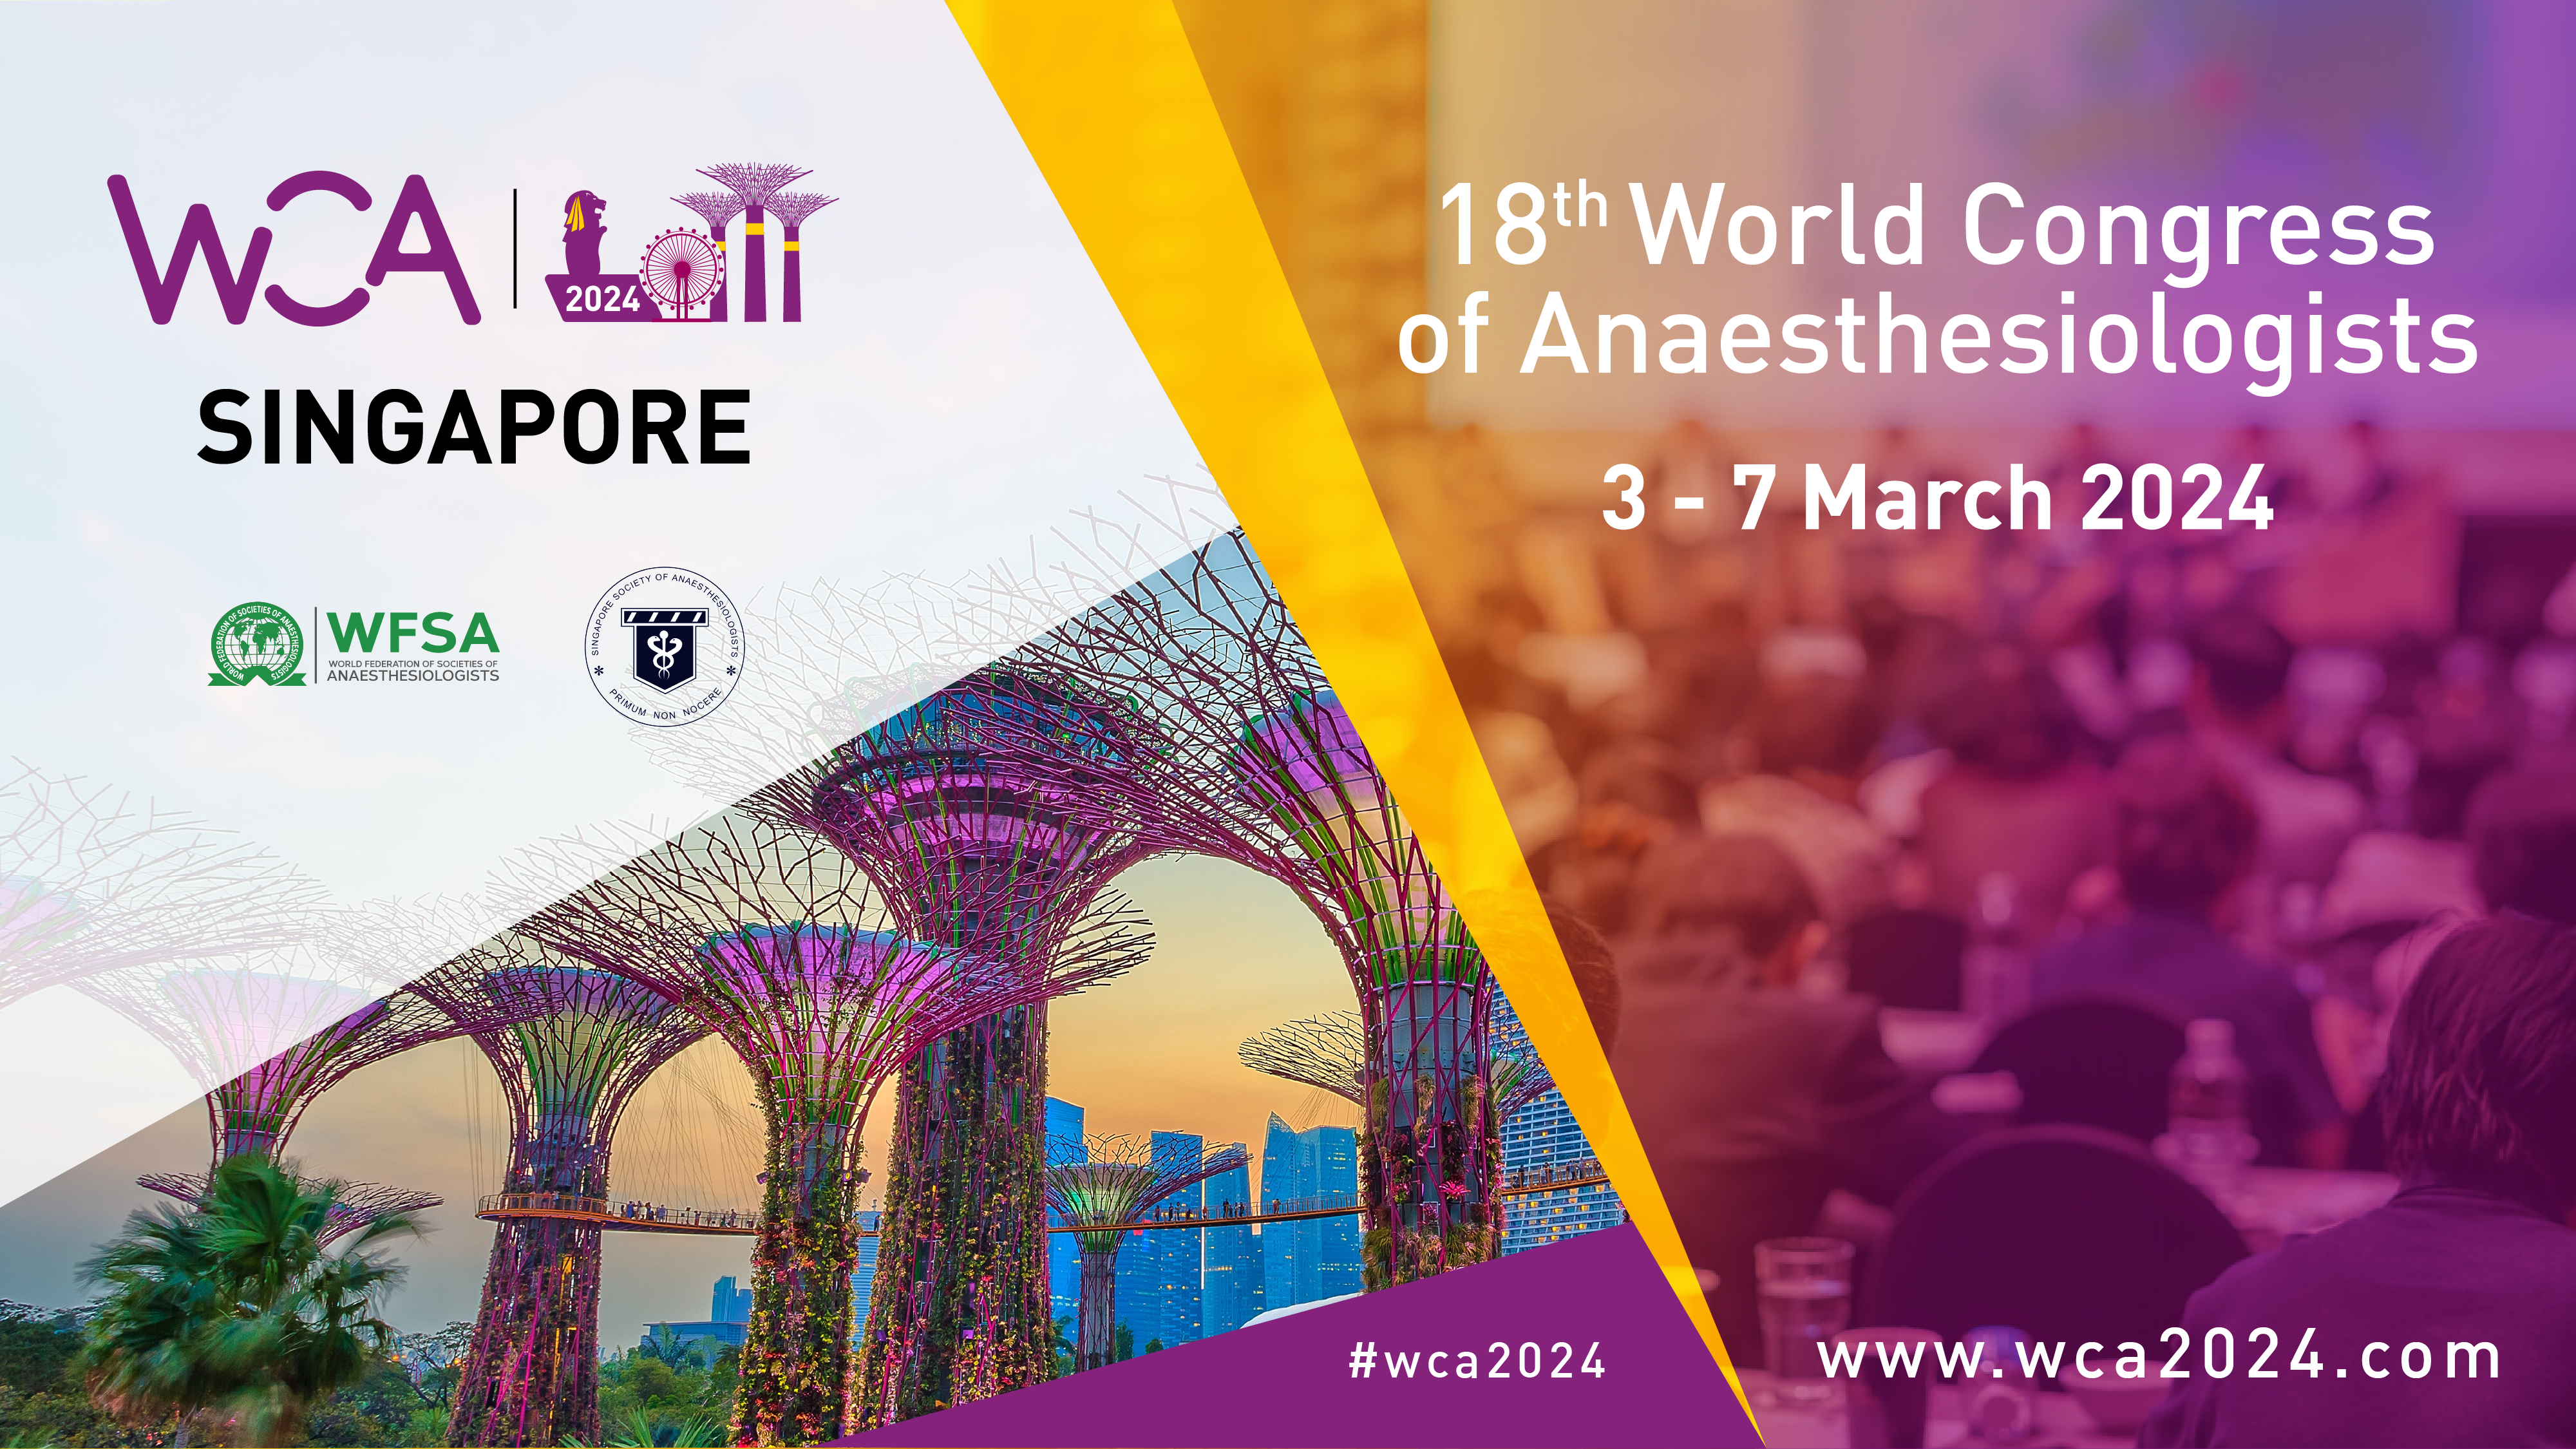 18th WCA 2024 World Congress of Anaesthesiologists